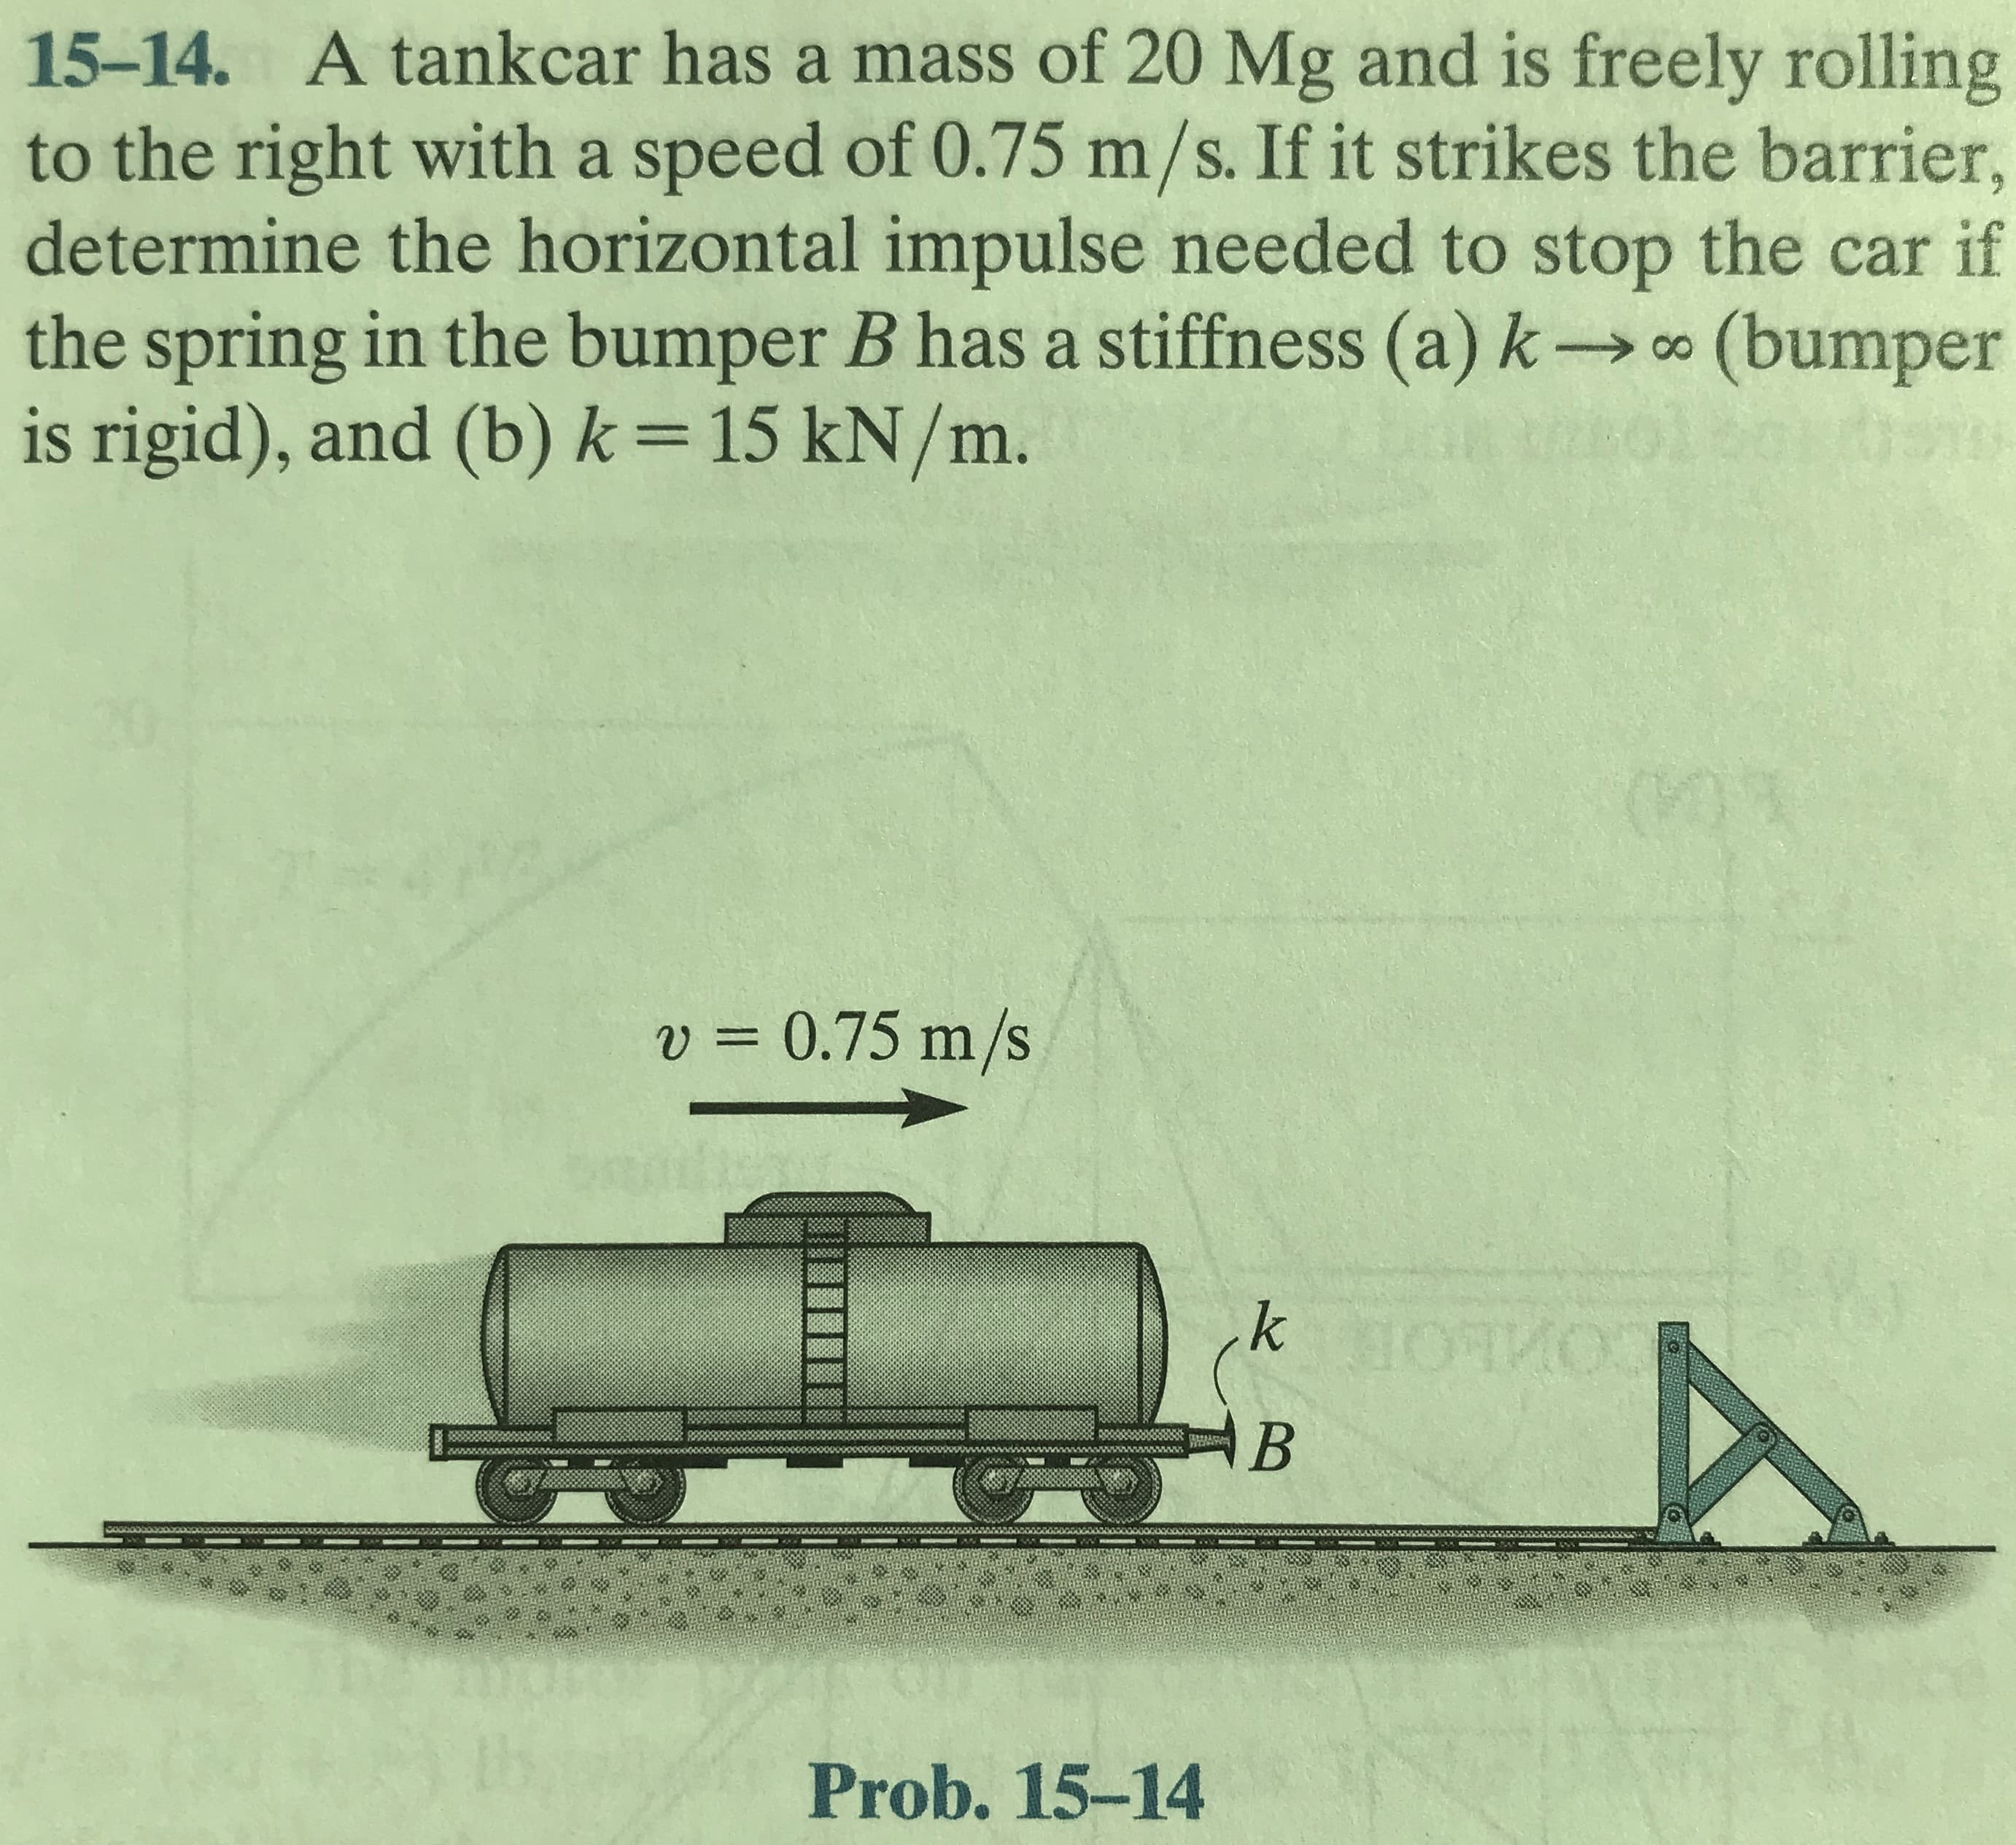 15-14. A tankcar has a mass of 20 Mg and is freely rolling
to the right with a speed of 0.75 m/s. If it strikes the barrier,
determine the horizontal impulse needed to stop the car if
the spring in the bumper B has a stiffness (a) k 0
is rigid), and (b) k=15 kN/m.
(bumper
%3|
v = 0.75 m/s
AB
Prob. 15-14
